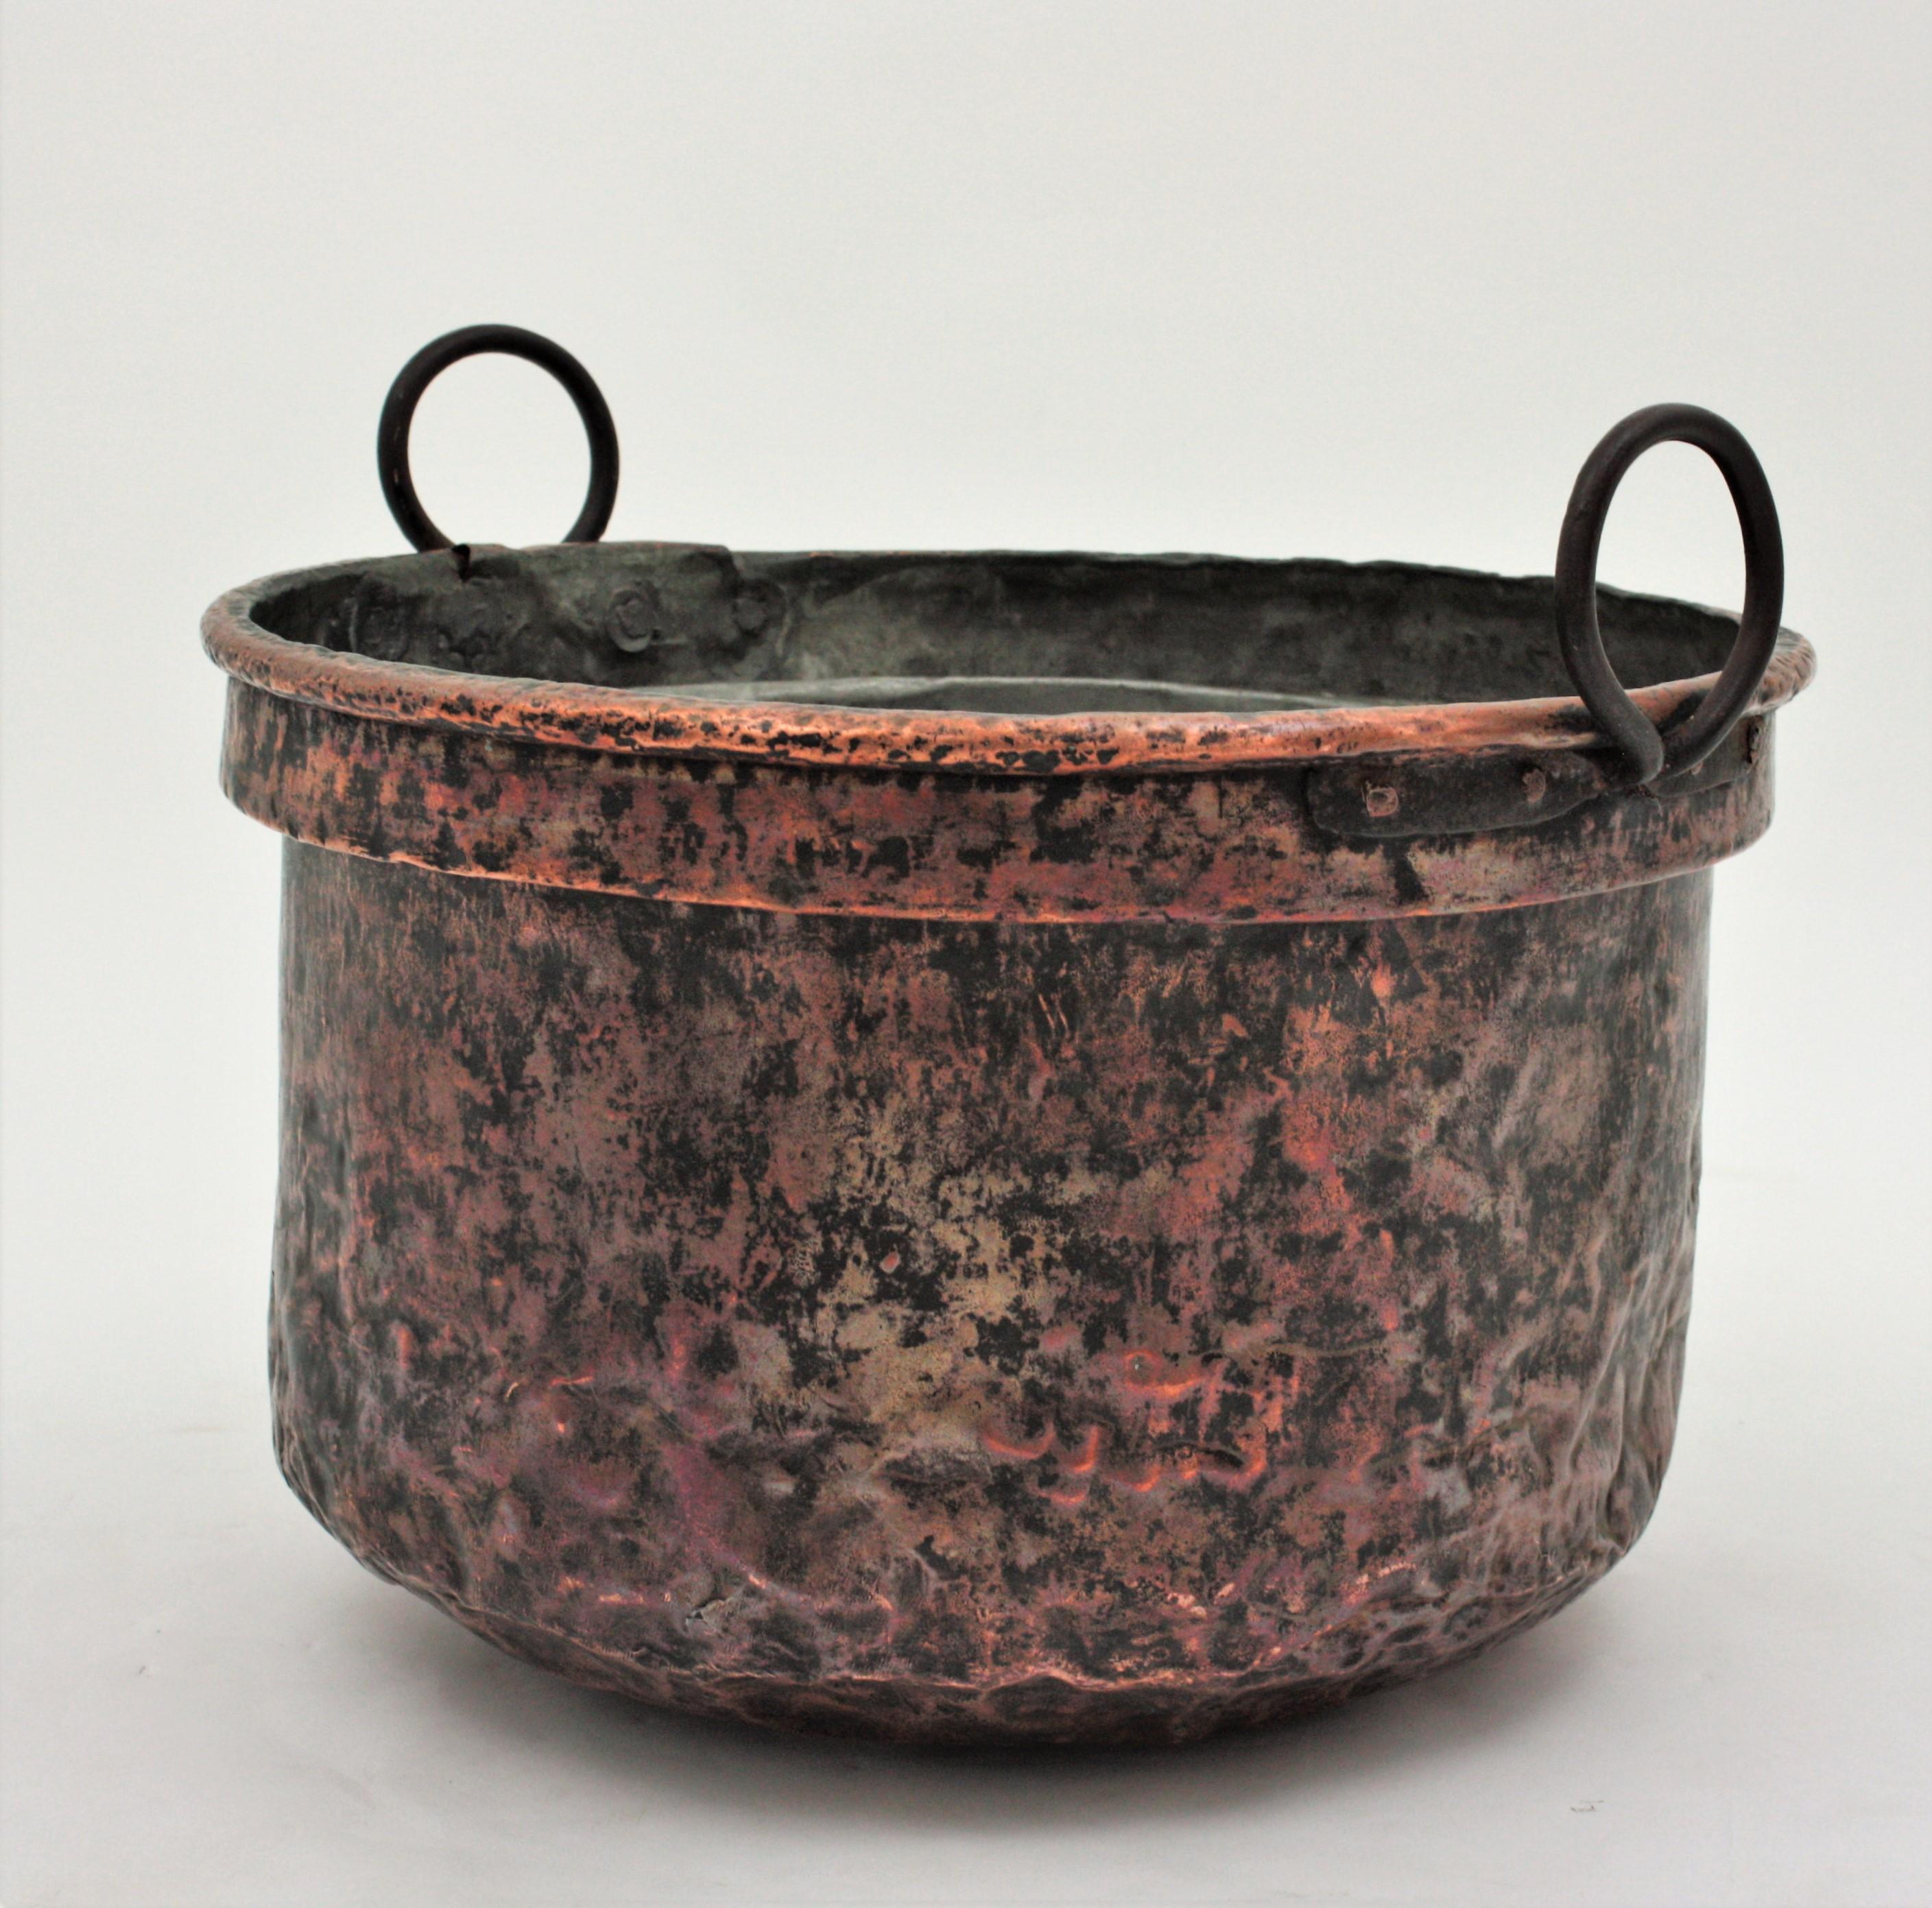 Massive 19th Century French Copper Cauldron with Handles and Terrific Patina 4